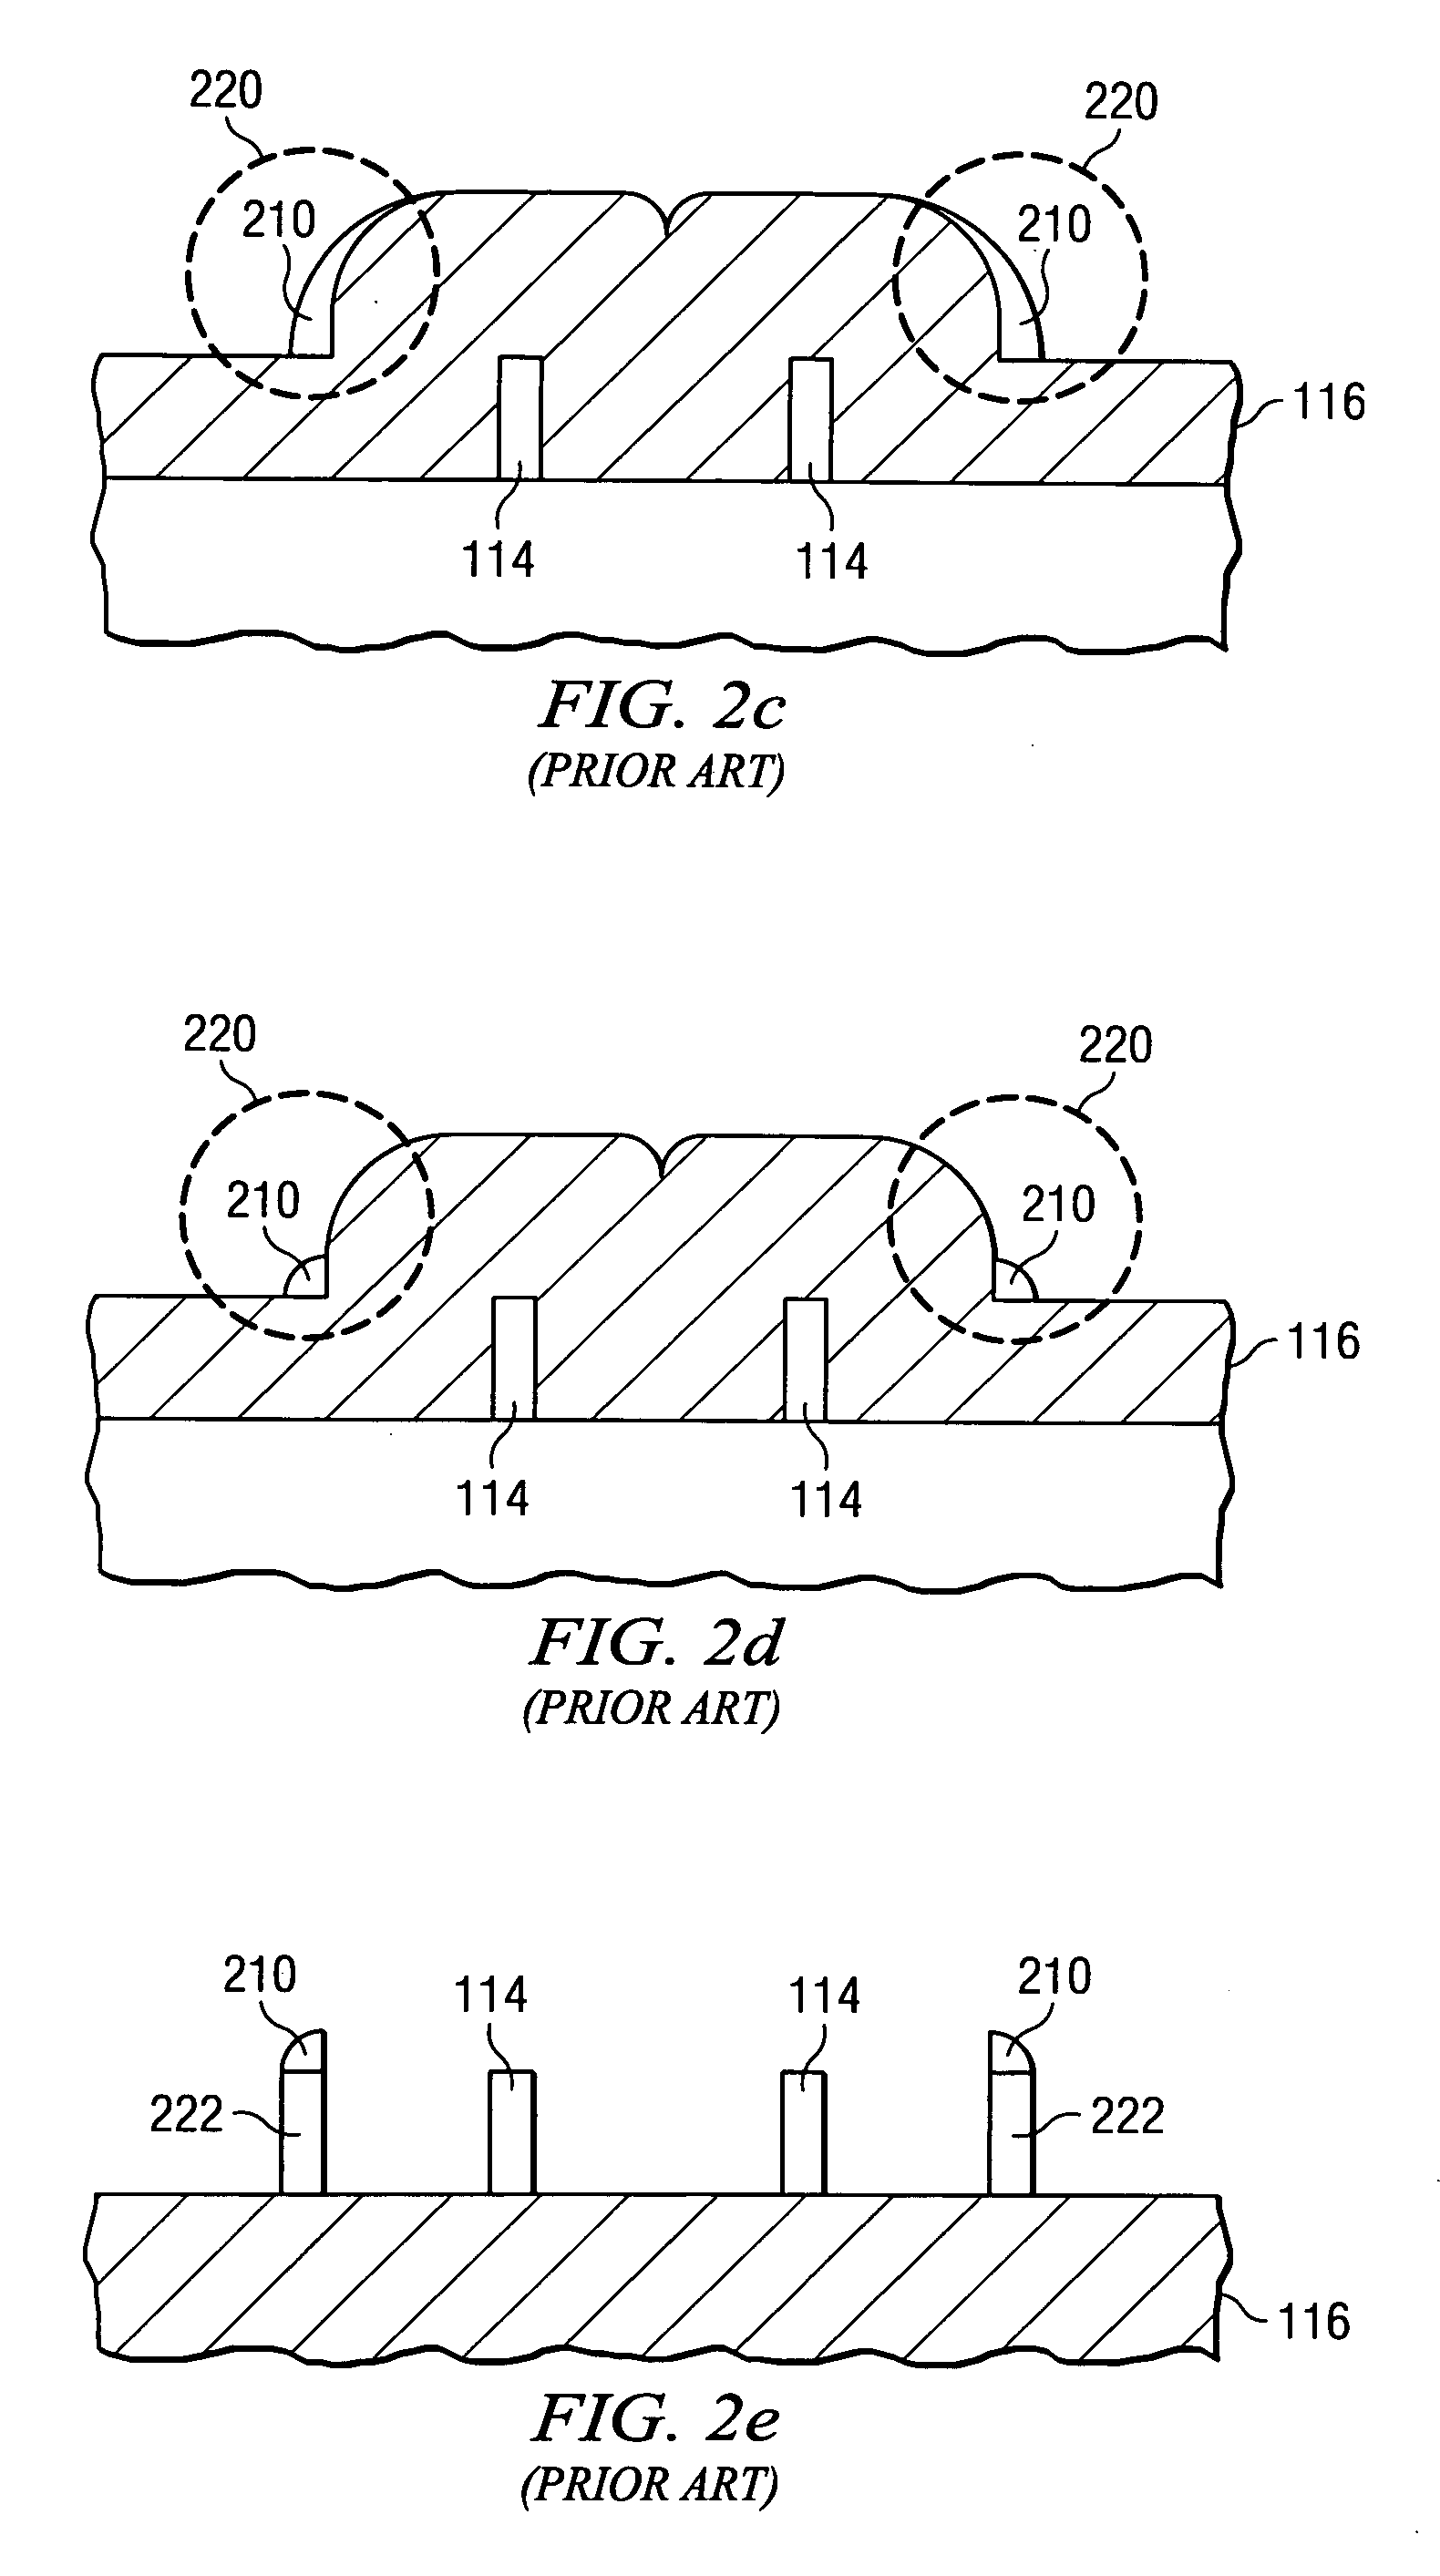 Trench-gate electrode for FinFET device